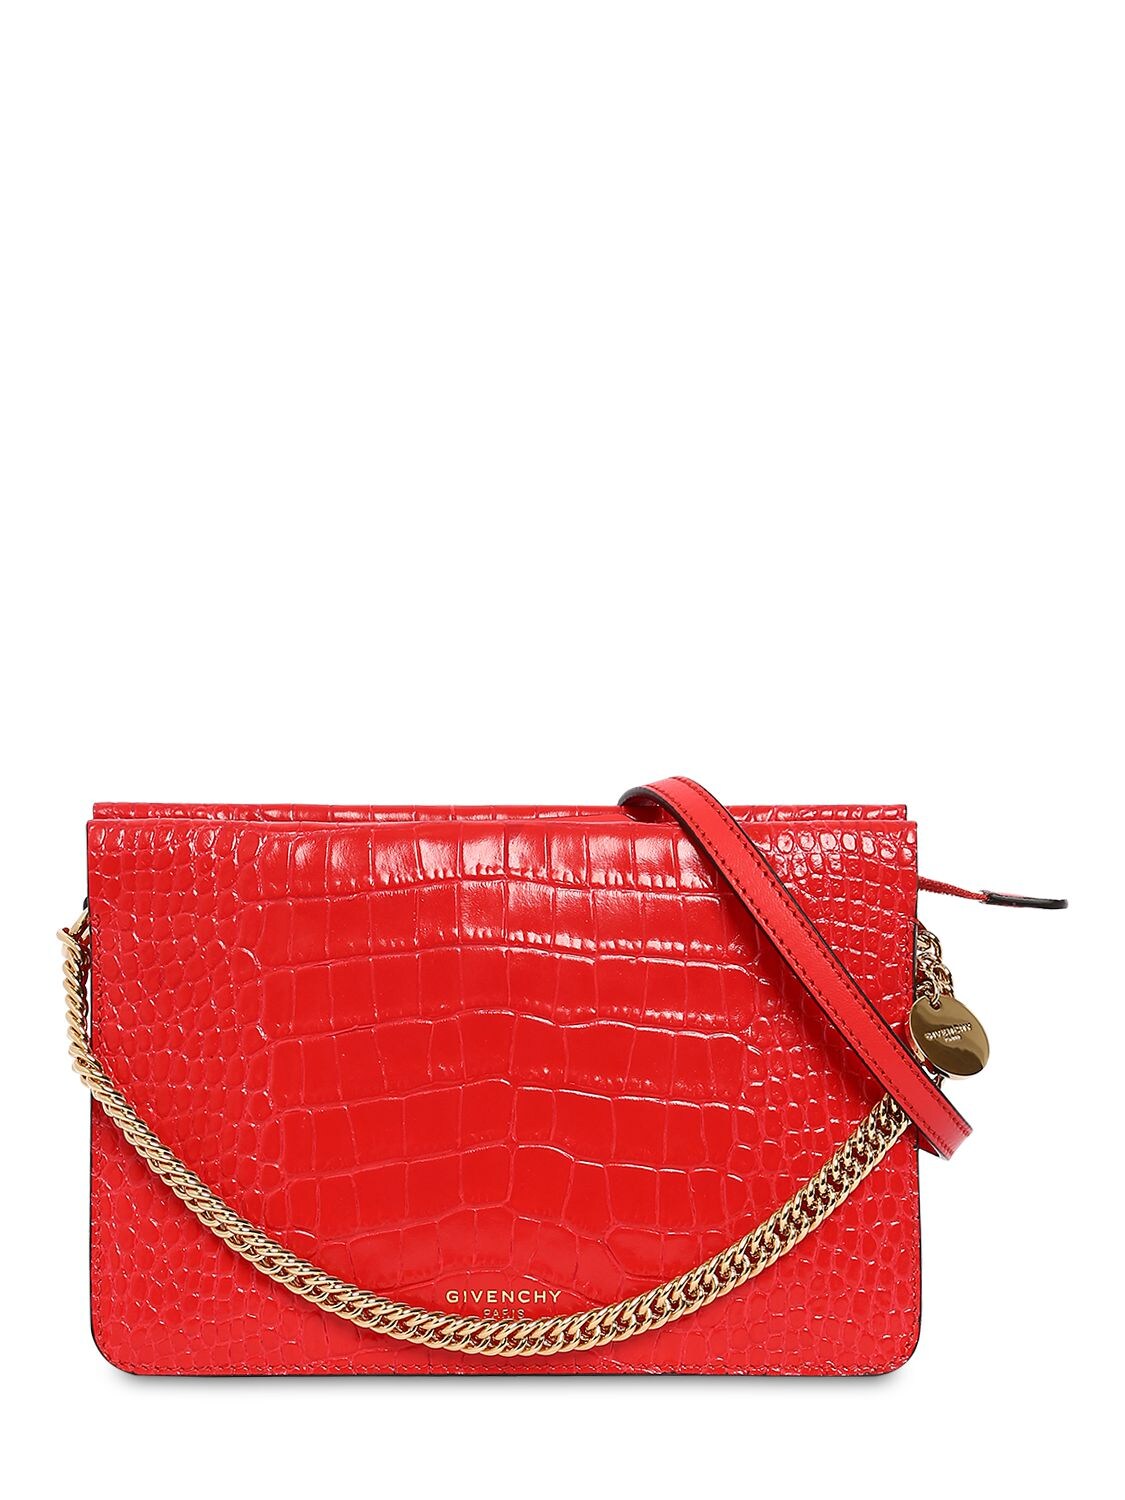 Givenchy Cross3 Croc Embossed Leather Bag In Red